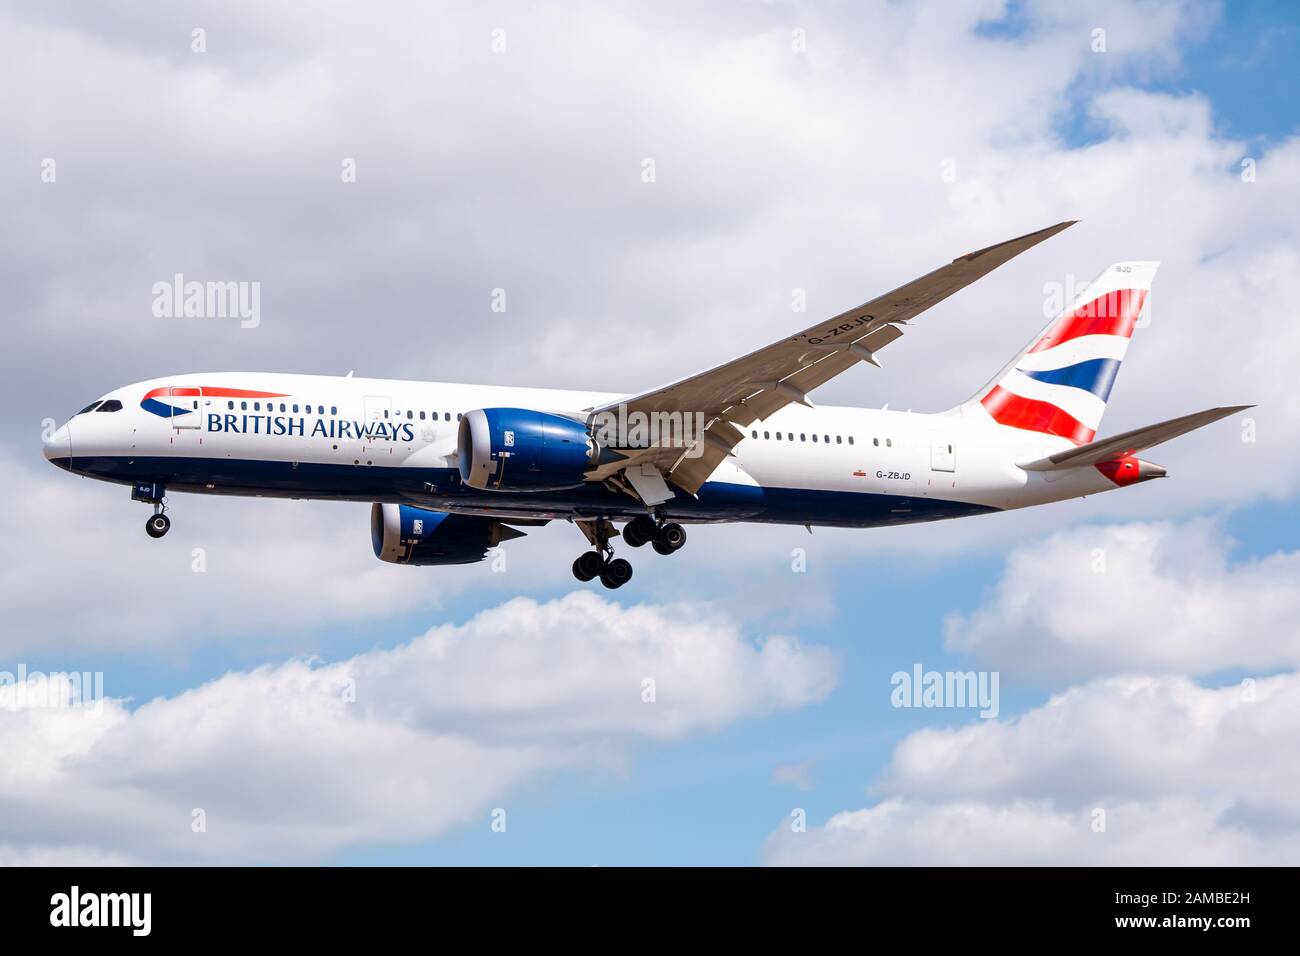 London, United Kingdom - August 1, 2018: British Airways Boeing 787 airplane at London Heathrow airport (LHR) in the United Kingdom. Boeing is an airc Stock Photo